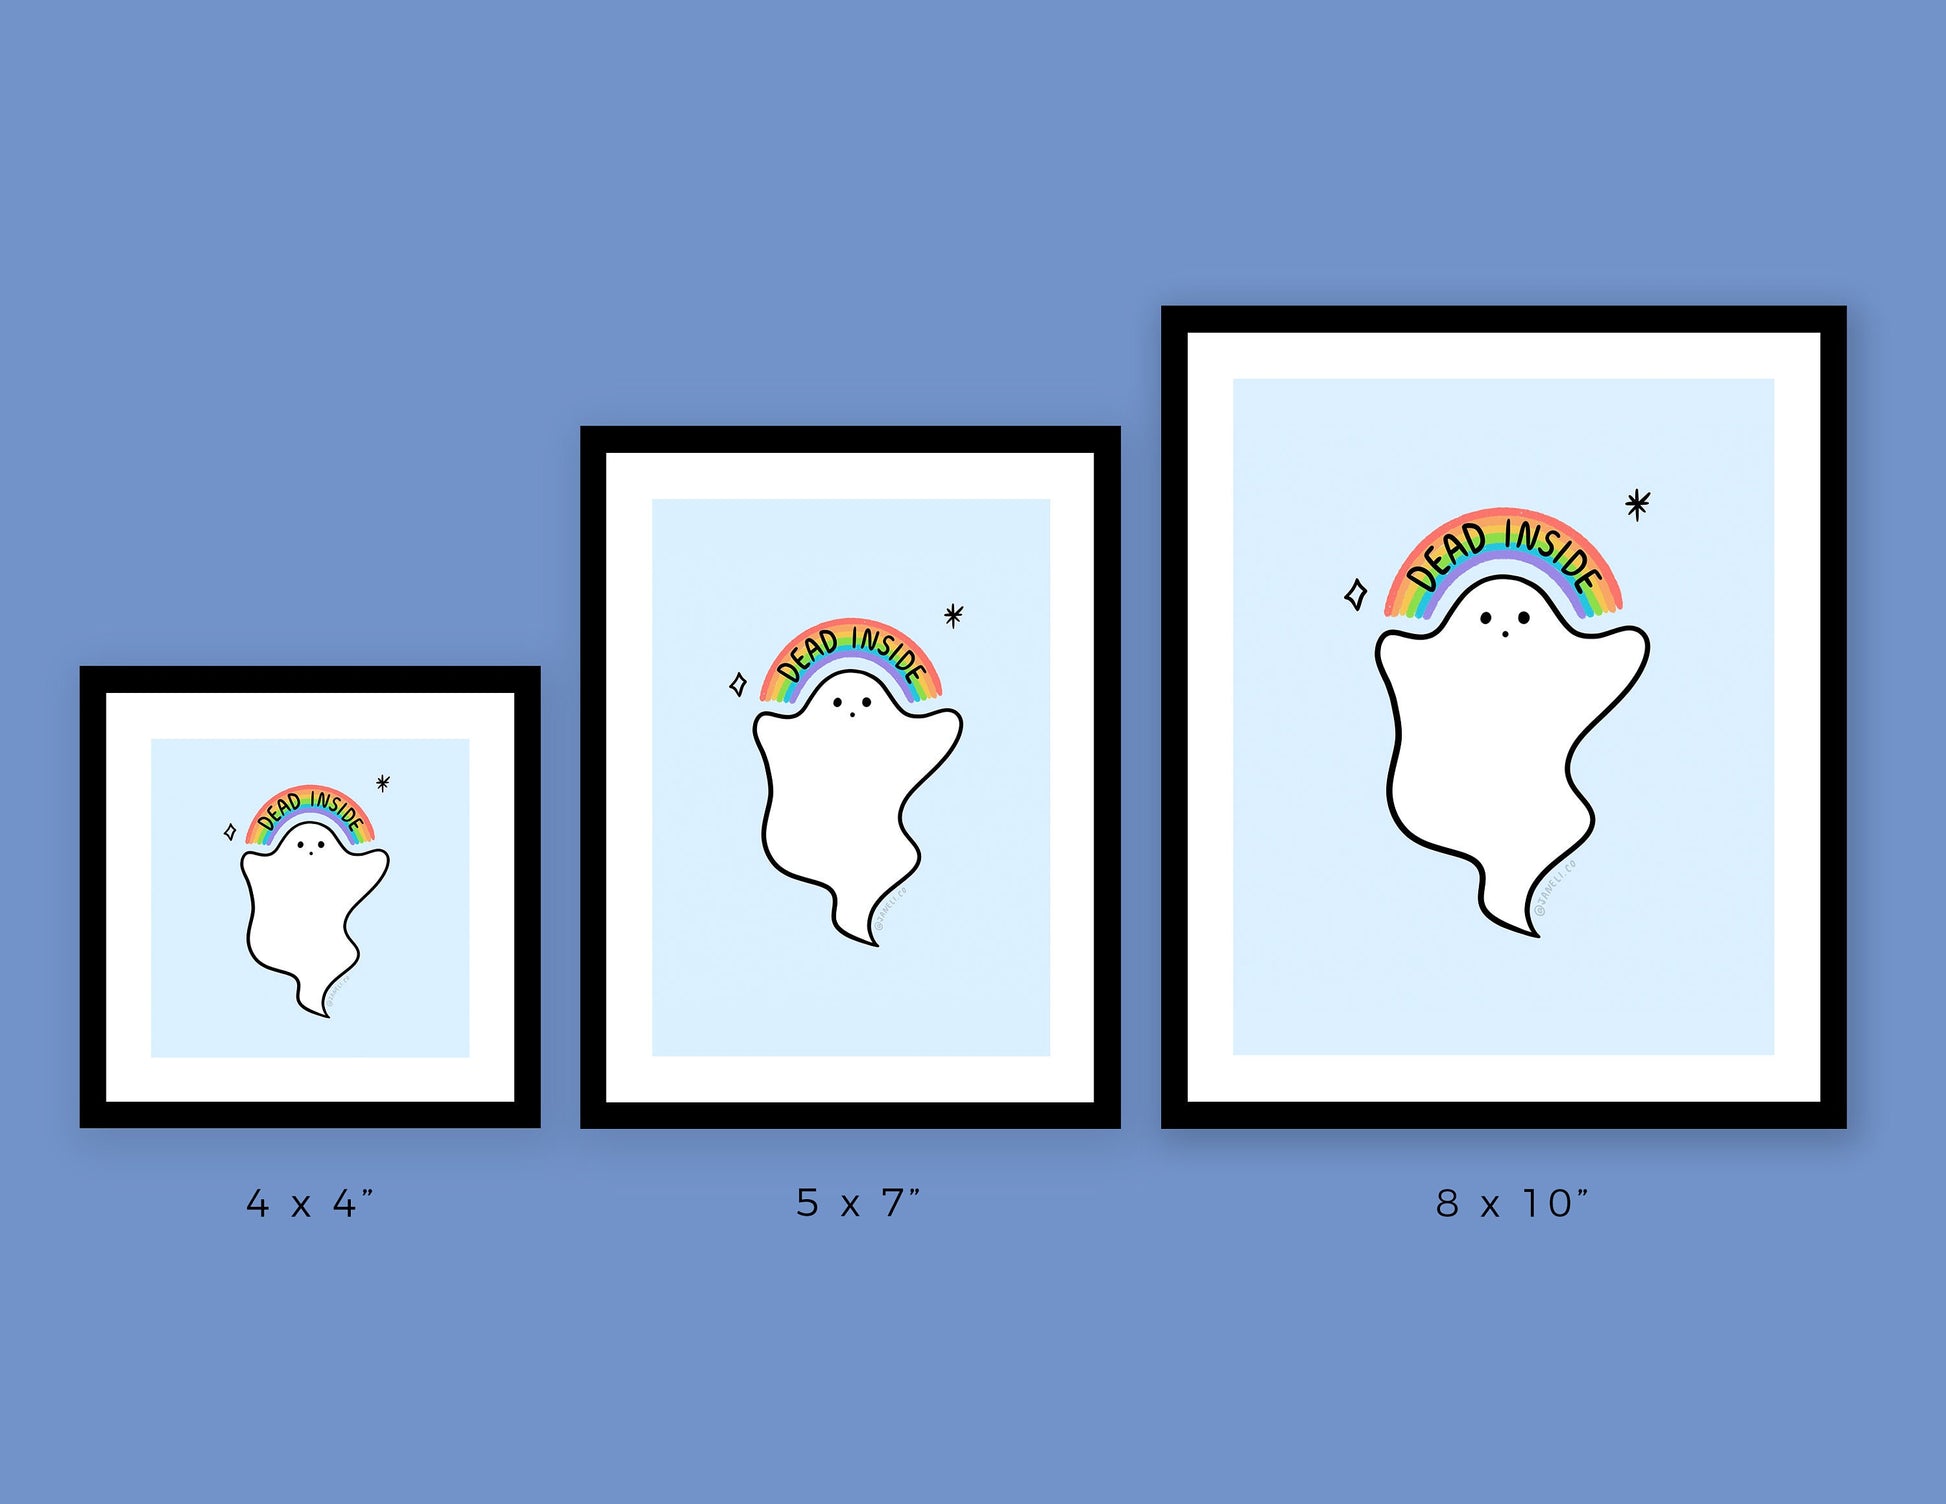 A digital mock of 3 framed JaneLi.Co prints that show little white ghosts holding up rainbows that say "Dead Inside" over a navy blue background. The prints show 3 sizes (4x4", 5x7", 8x10") arranged from smallest to largest.